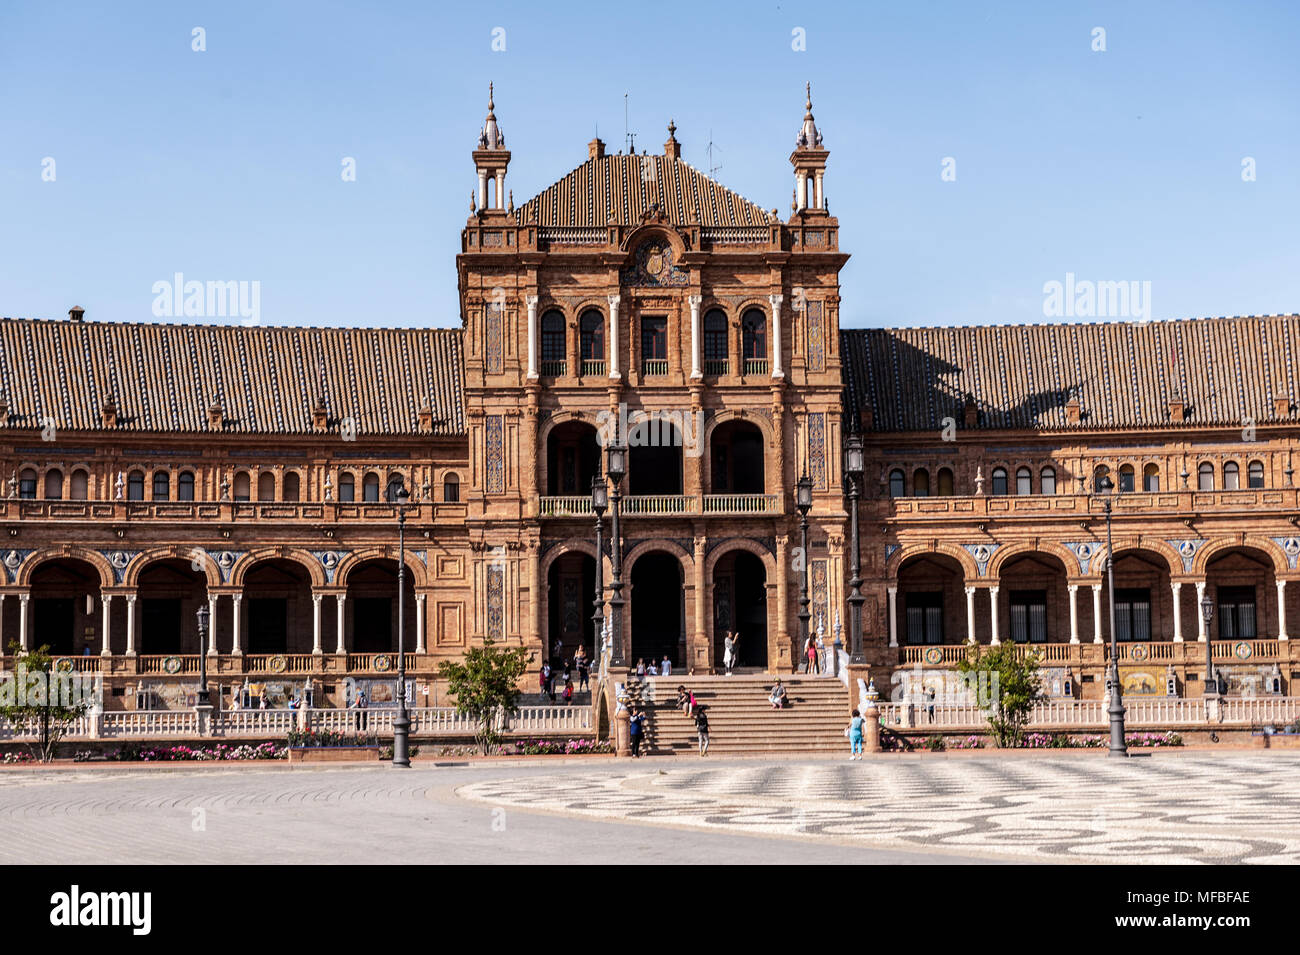 Central building at the Plaza de Espana in Seville, Andalusia, Spain. It's example of the Renaissance Revival style in Spanish architecture. Stock Photo